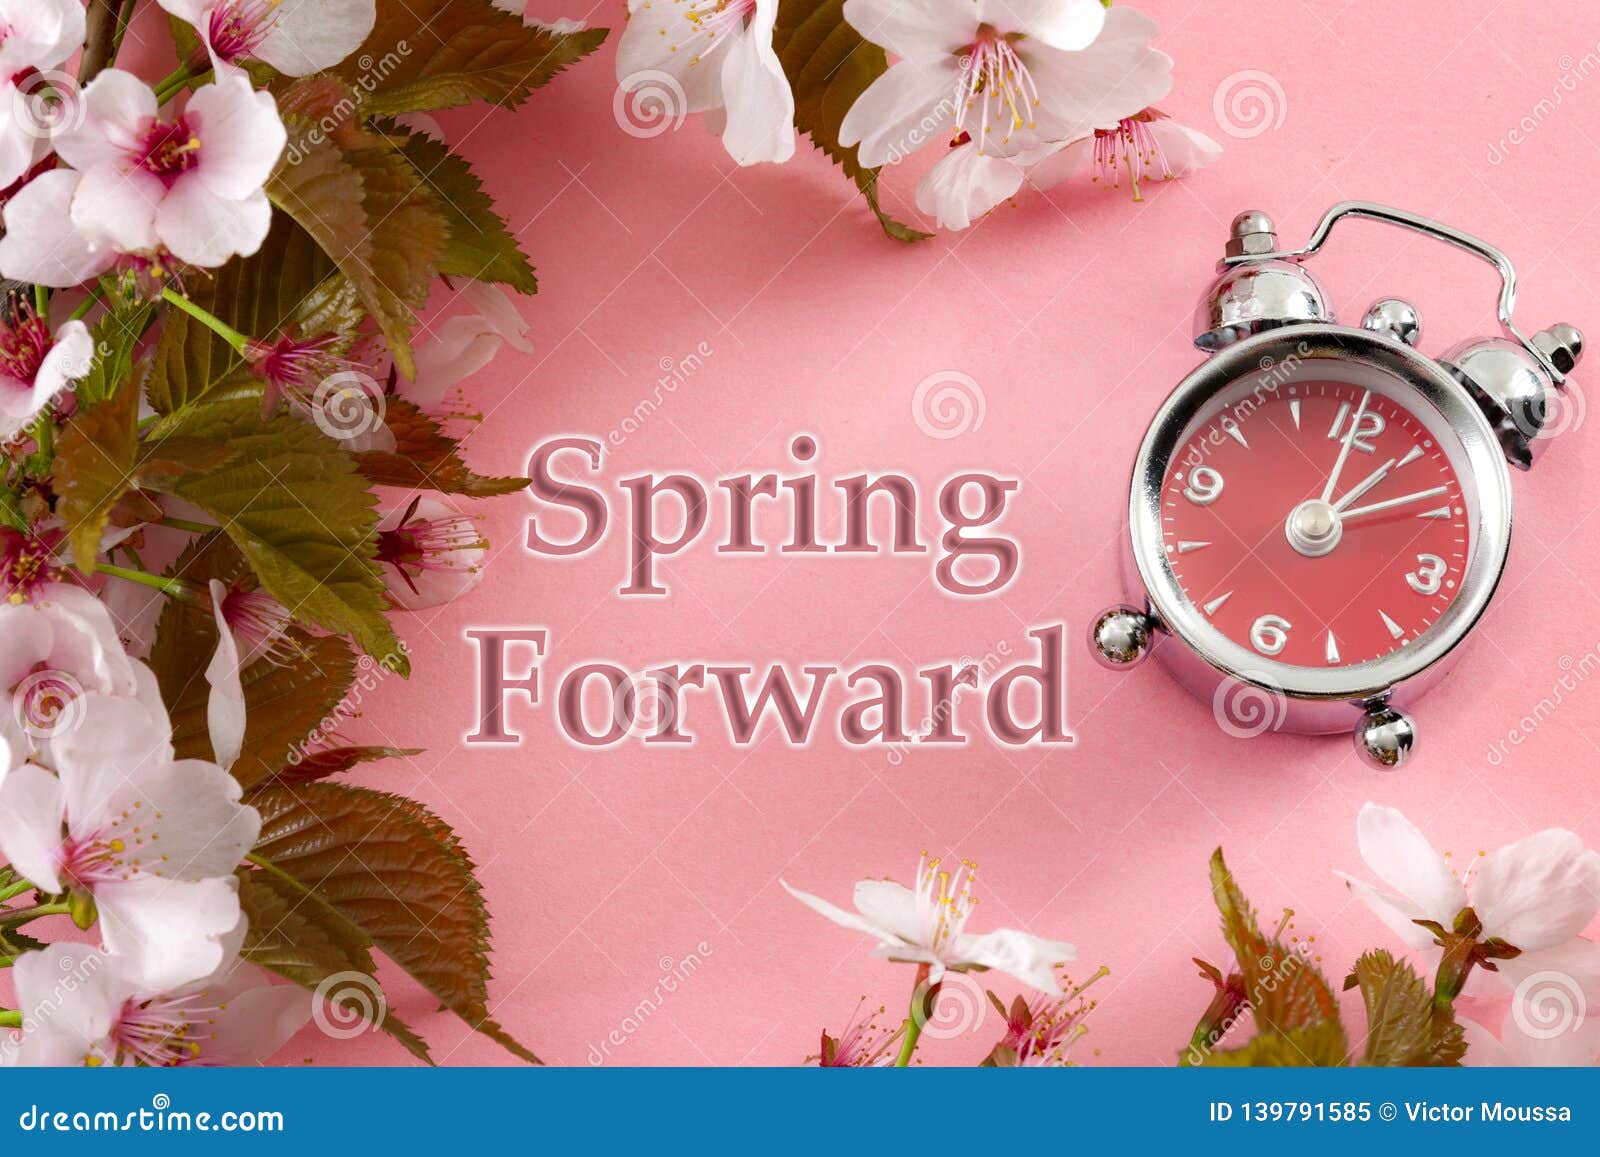 Turn Clocks On Hour Ahead Star Of Daylight Savings Time Change And Reminder To Spring Forward Concept With Alarm Clock On Pink Stock Image Image Of Nature Forward 139791585